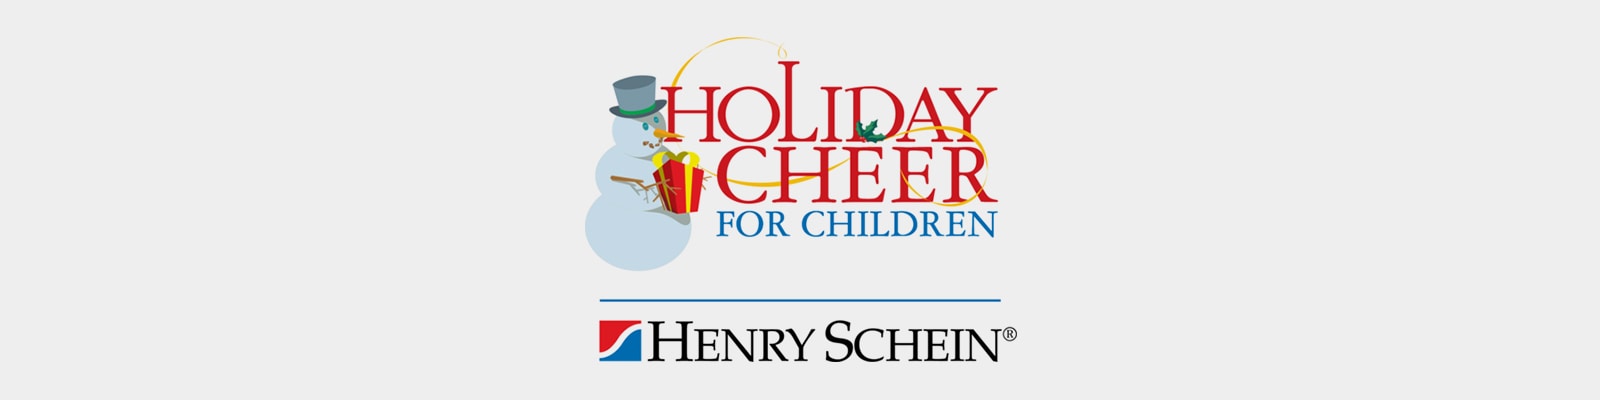 Holiday Cheer for Children